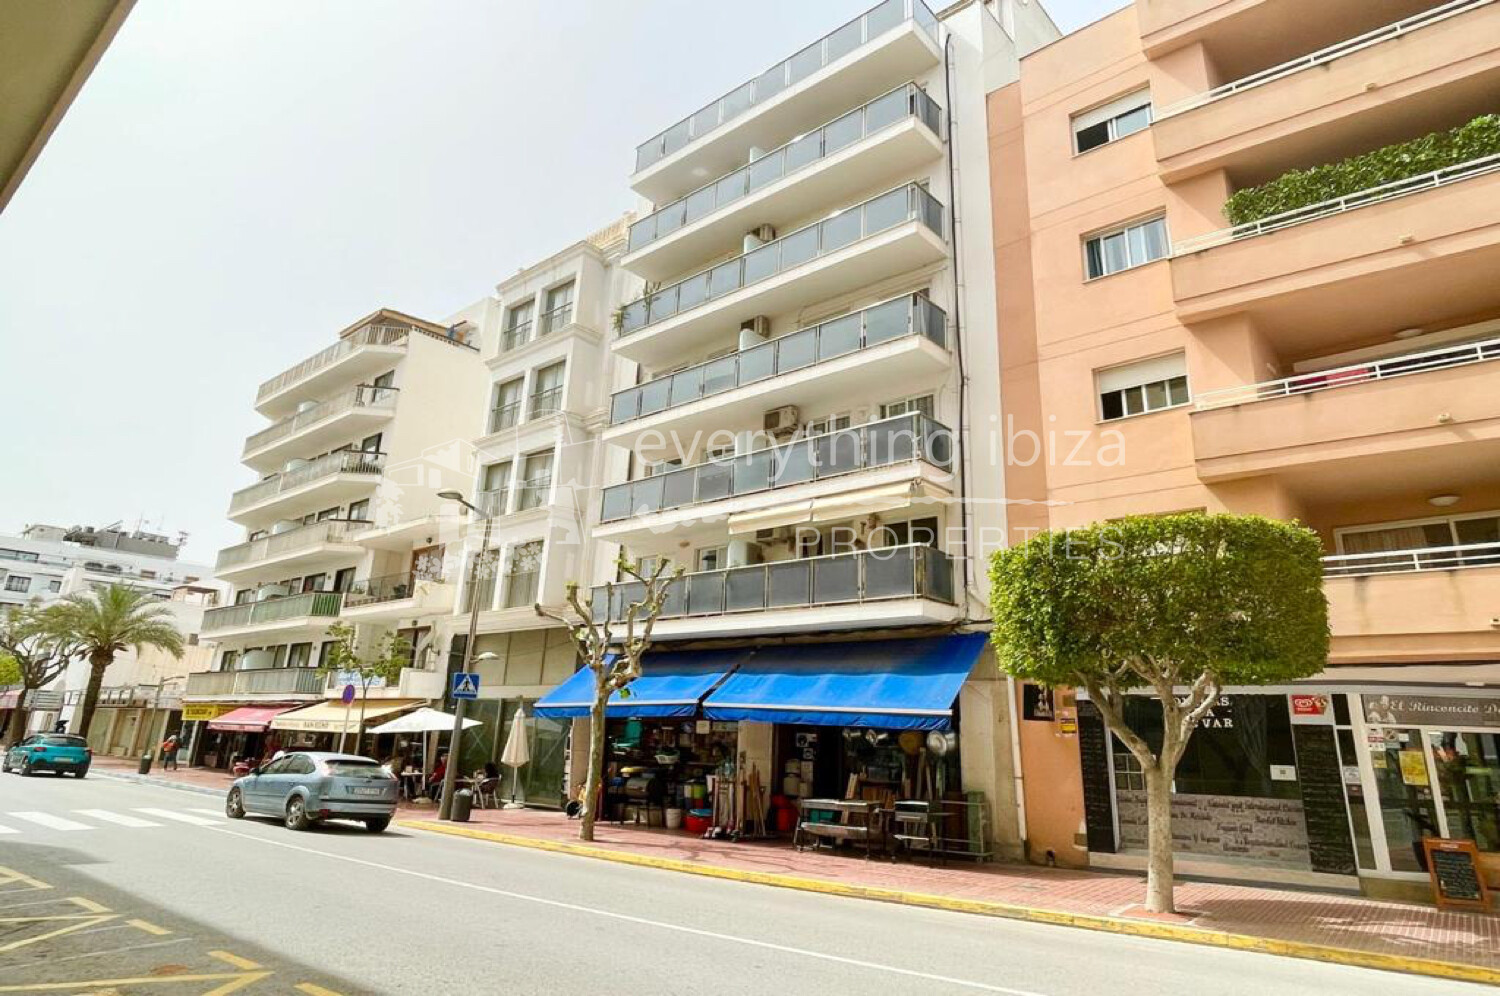 Residential Block with 14 Apartments in Central Santa Eulalia, ref. 1449, for sale in Ibiza by everything ibiza Properties